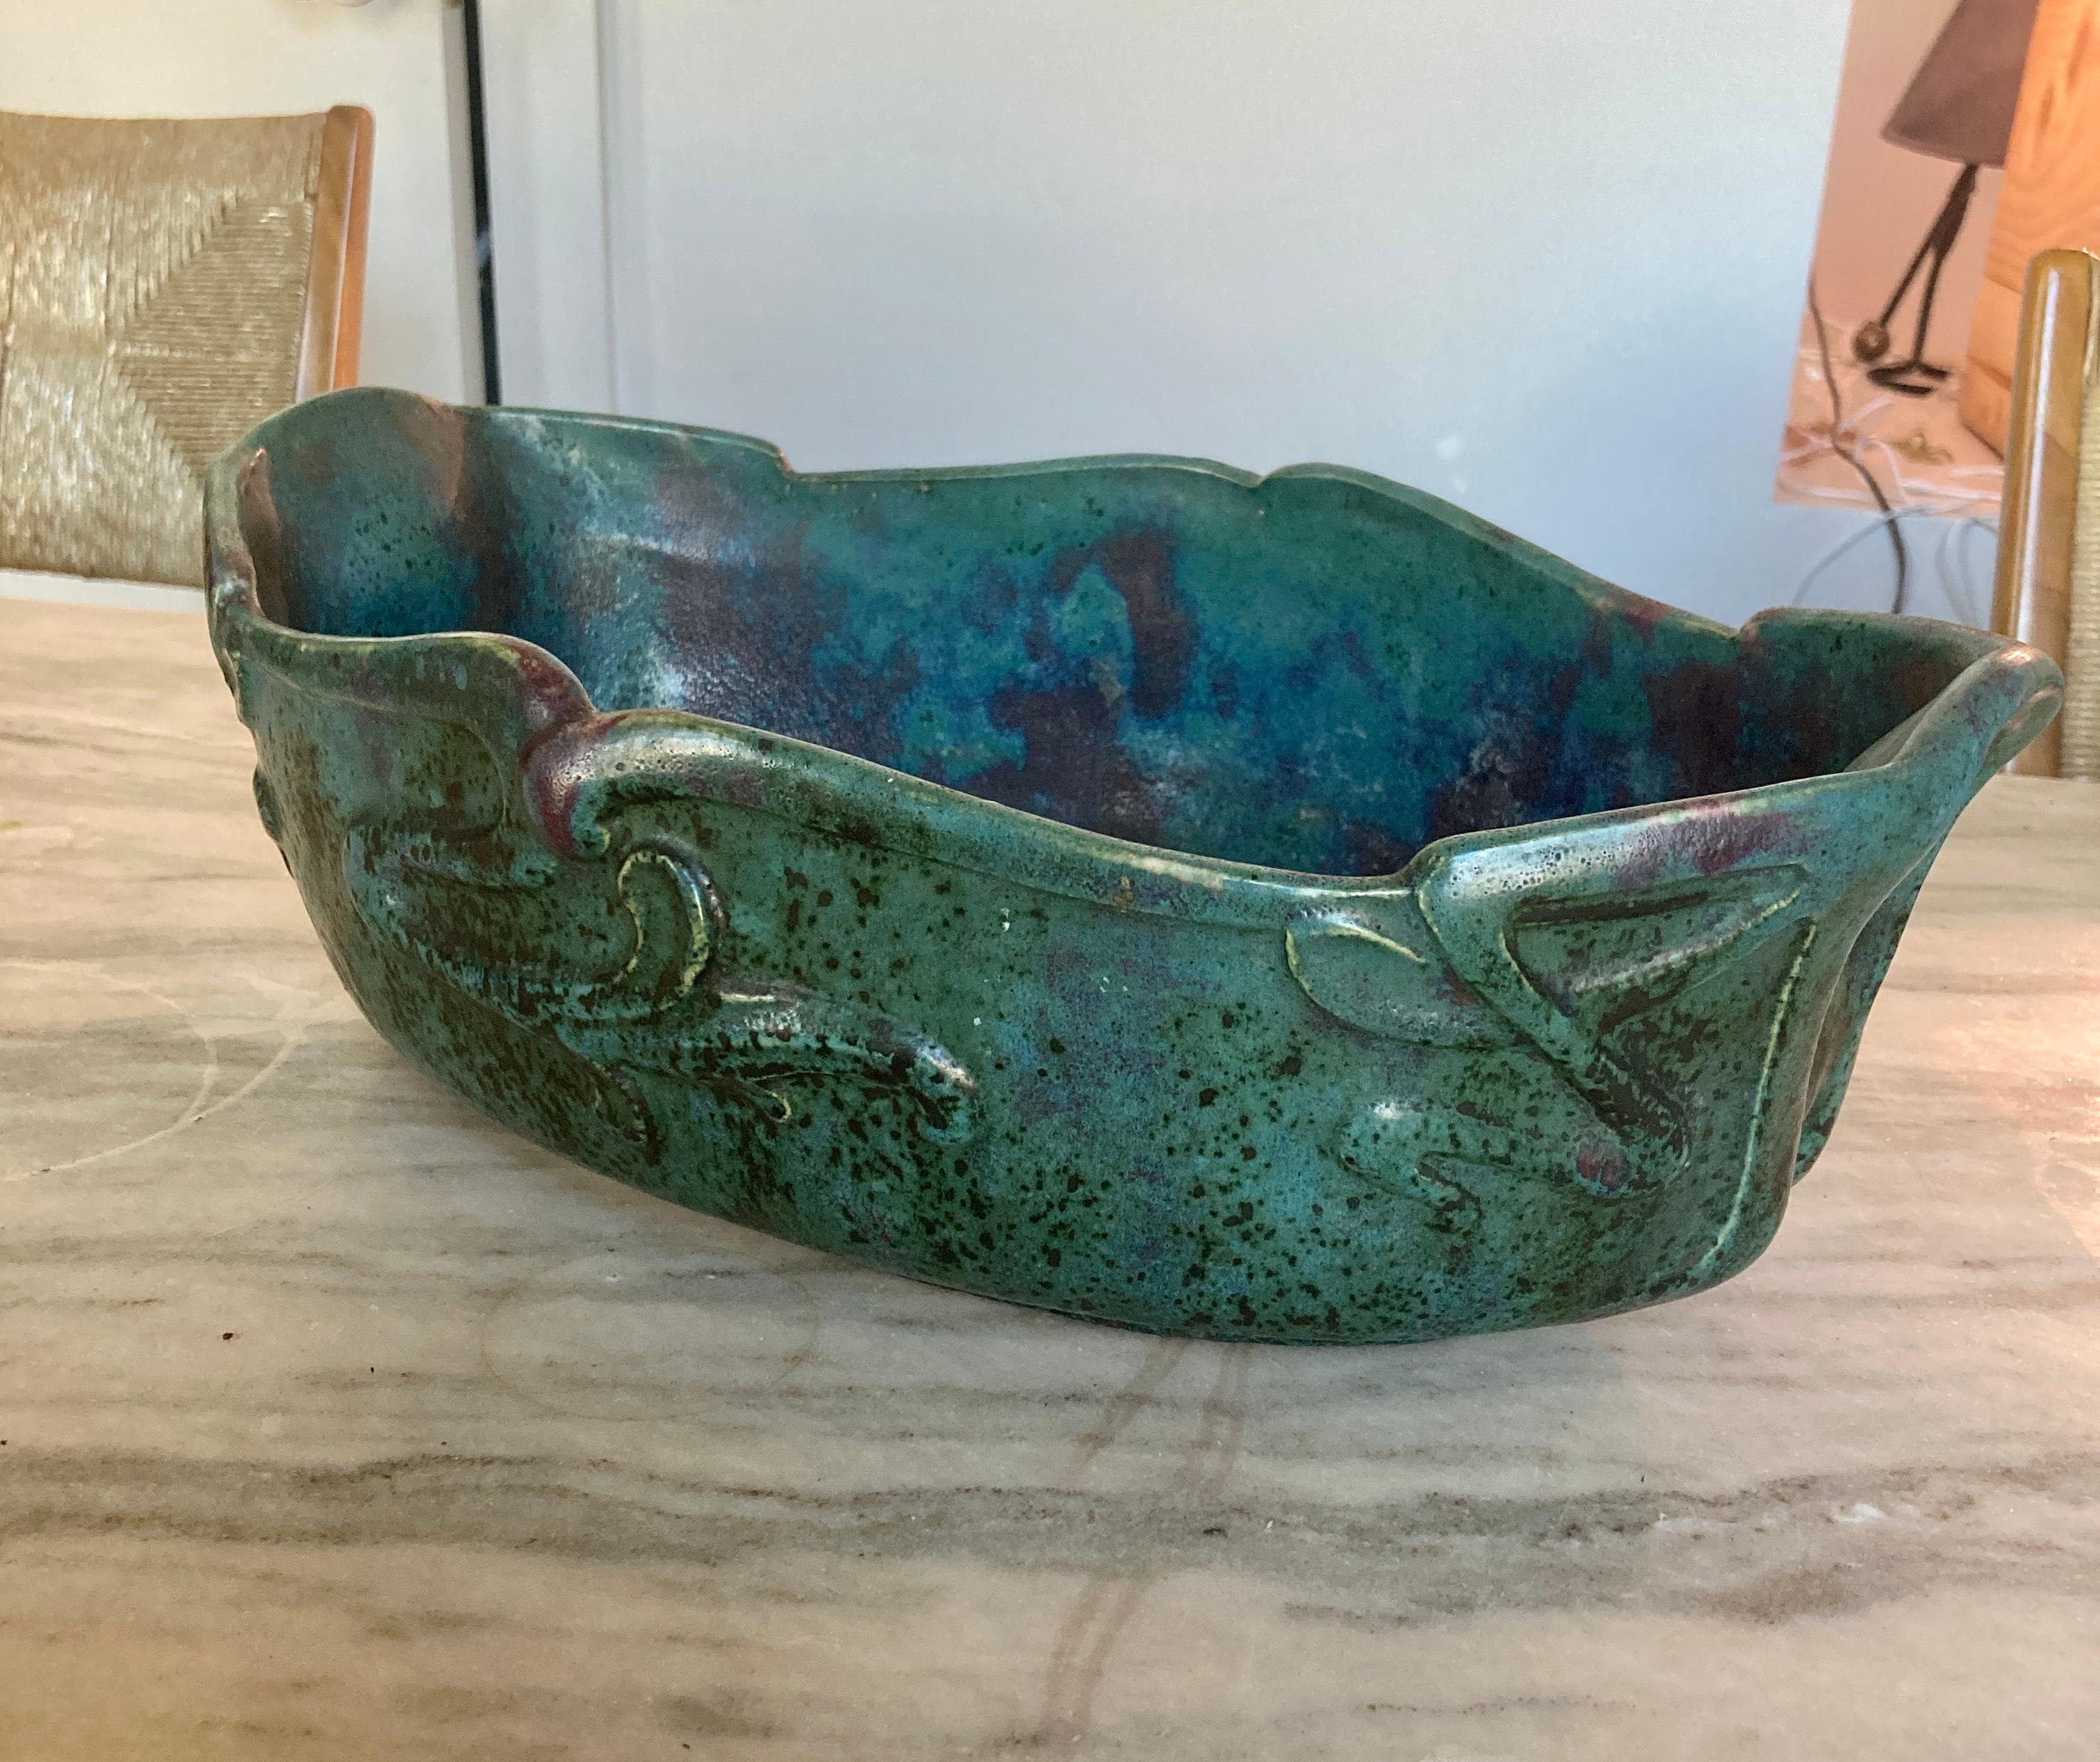 Flambe glazed stoneware, the boat-shaped vessel hand carved with stylized floral designs and glazed in an overall green with burst of reds and purples, circa 1900, France. Signed to underside.